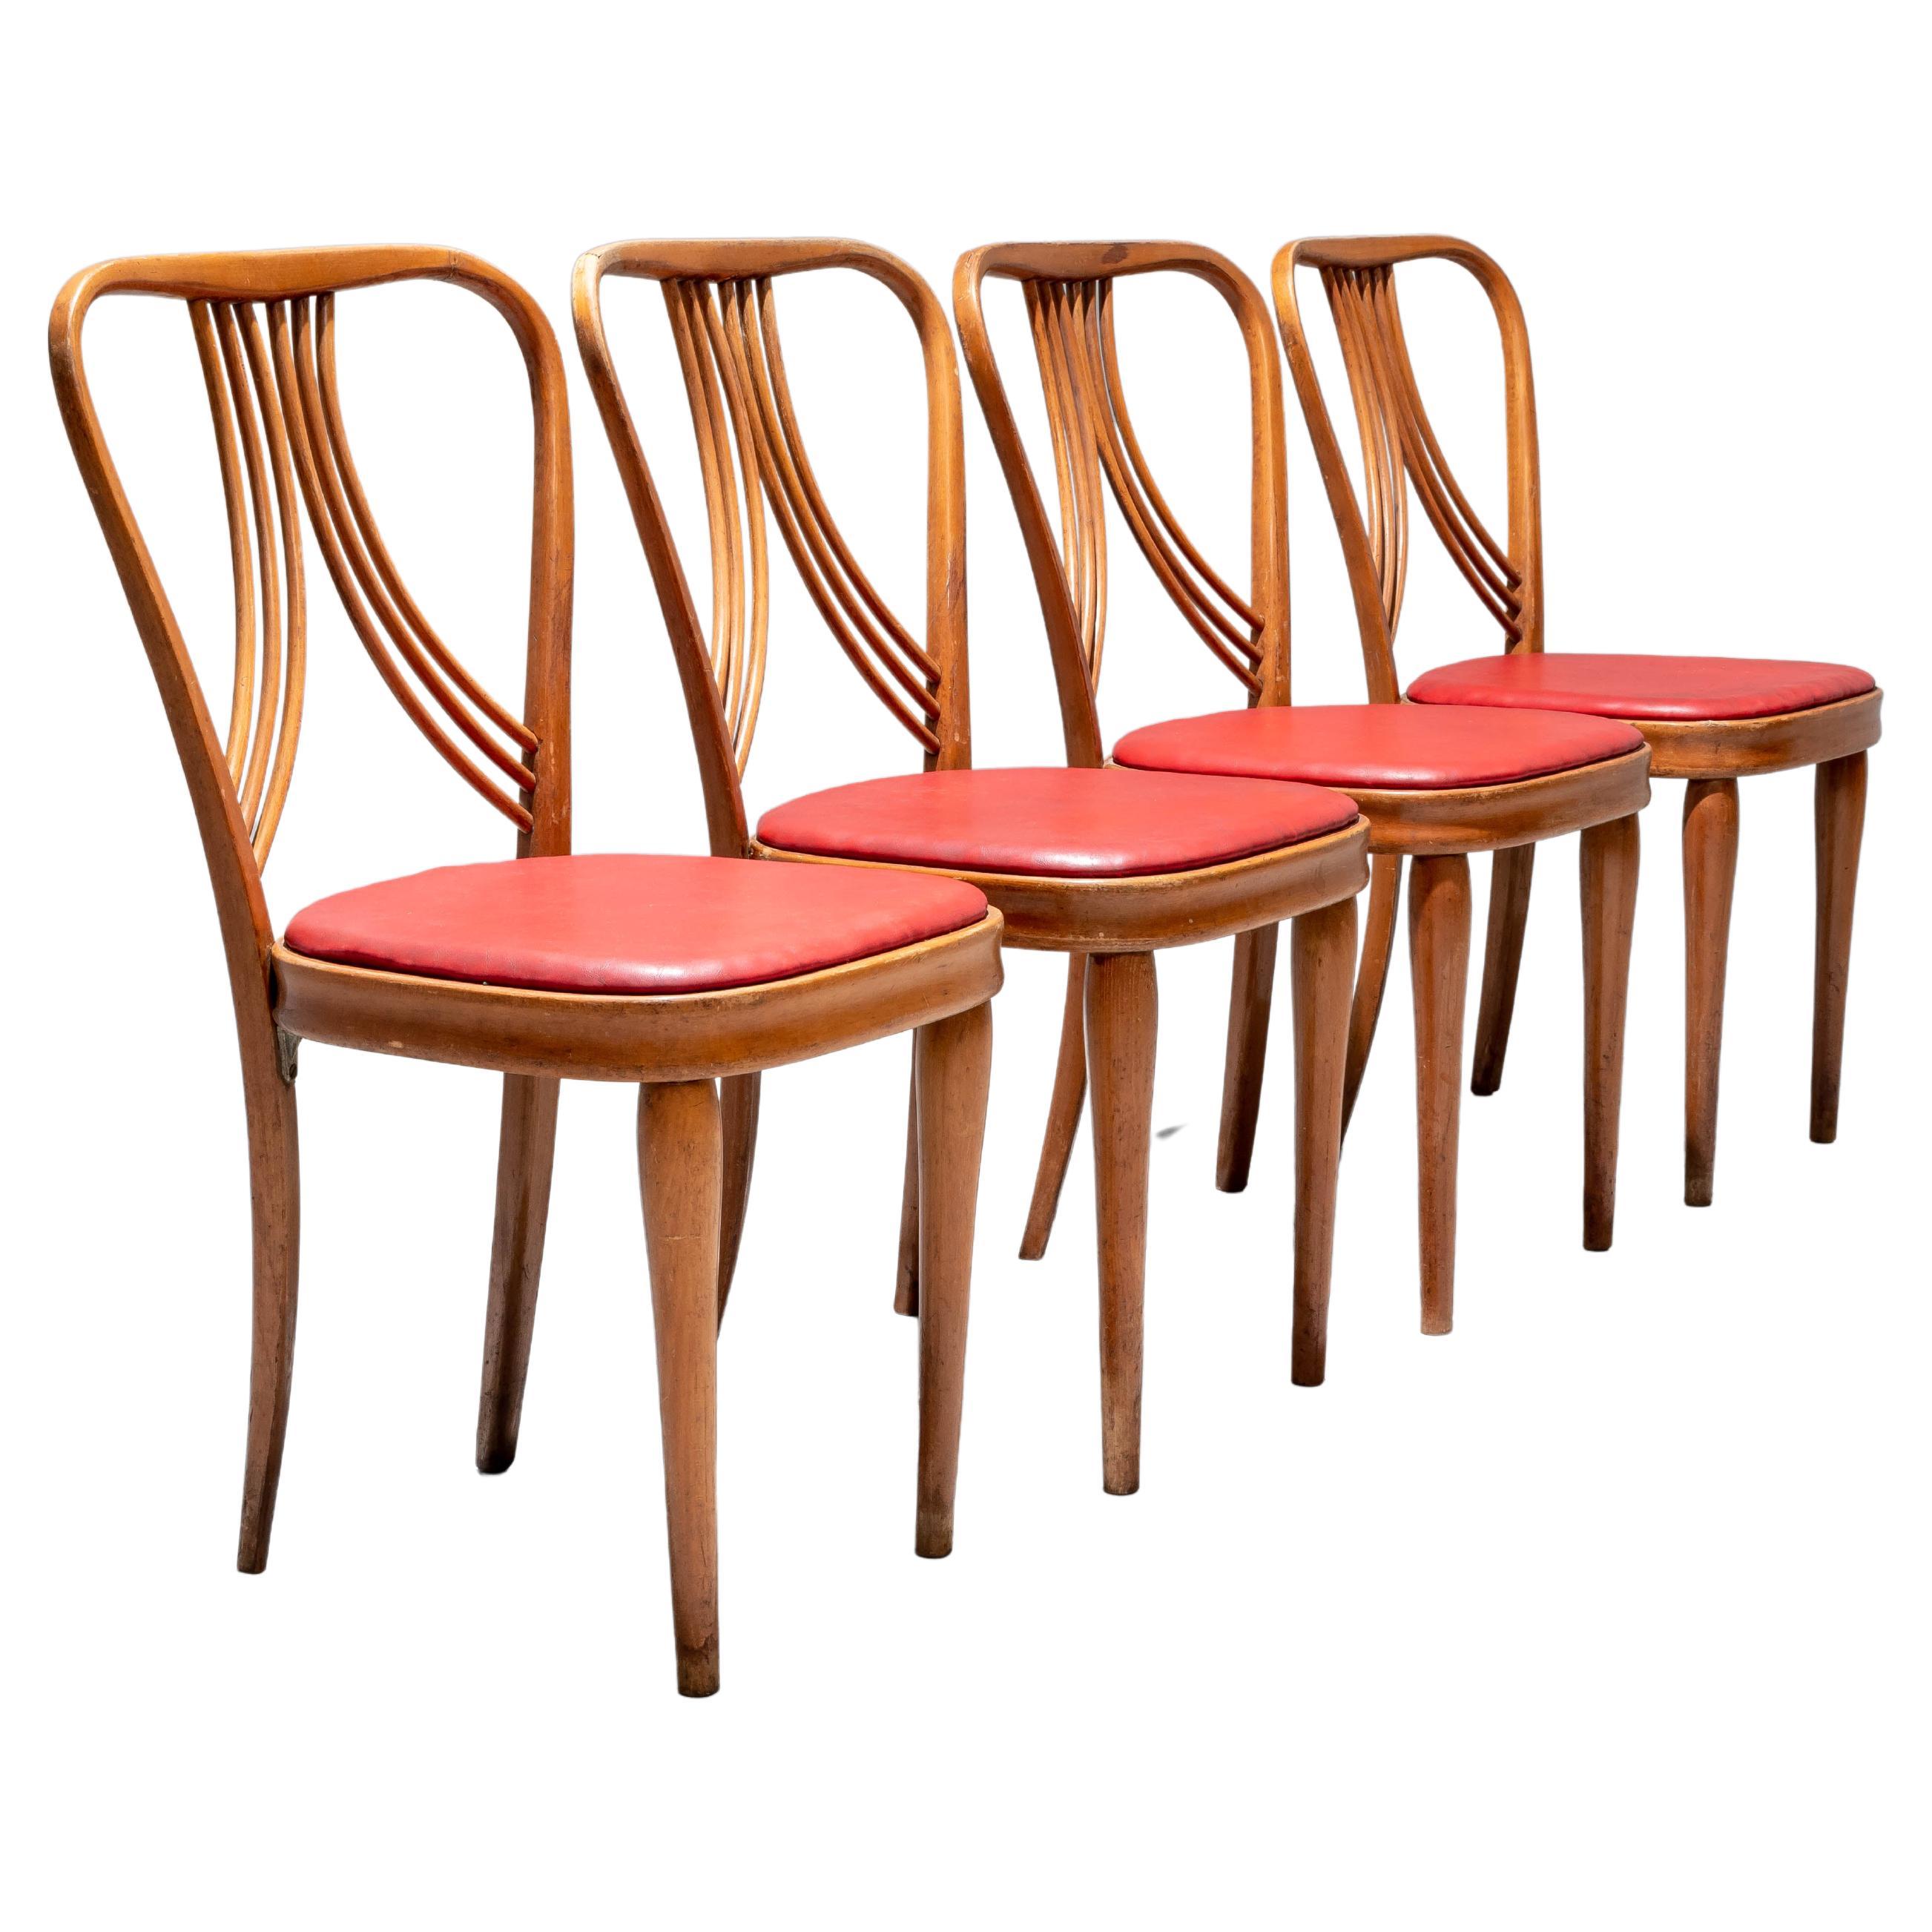 Set of 4 Diningroom Chairs in Blond Wood and Red Faux Leather, Italy, 1950's For Sale